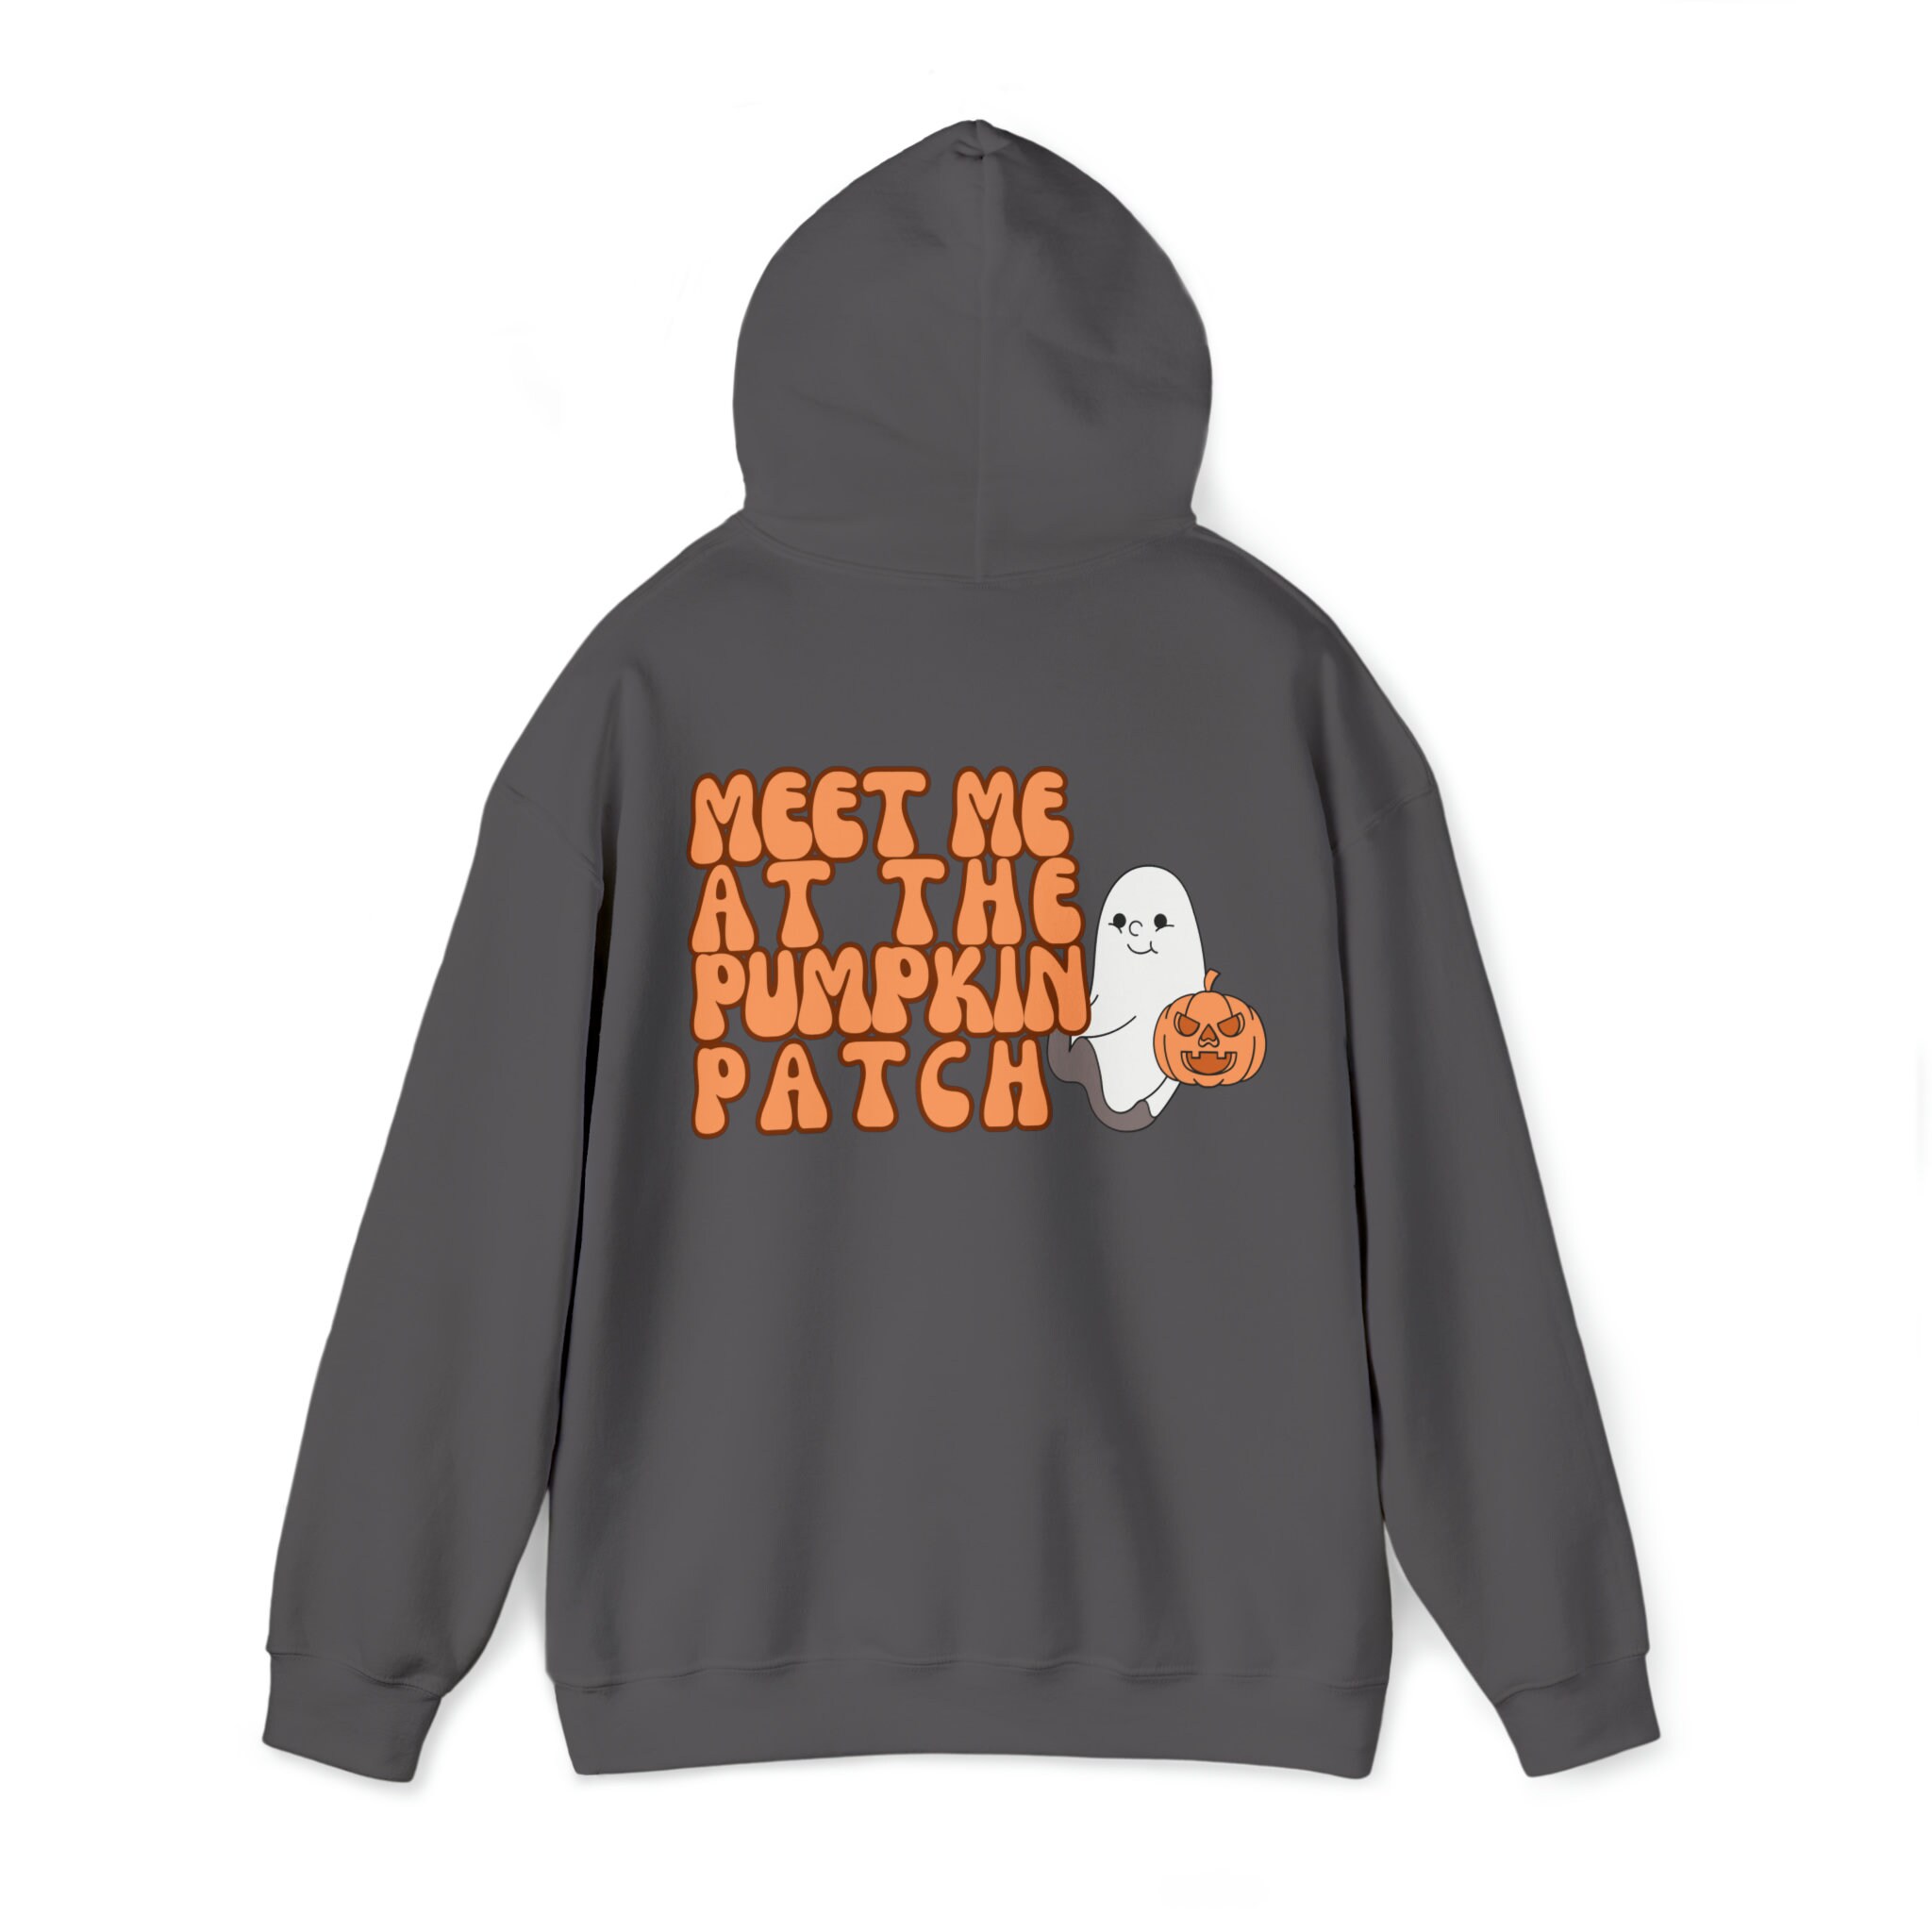 Discover Meet me at the Pumpkin Patch Hooded Sweatshirt